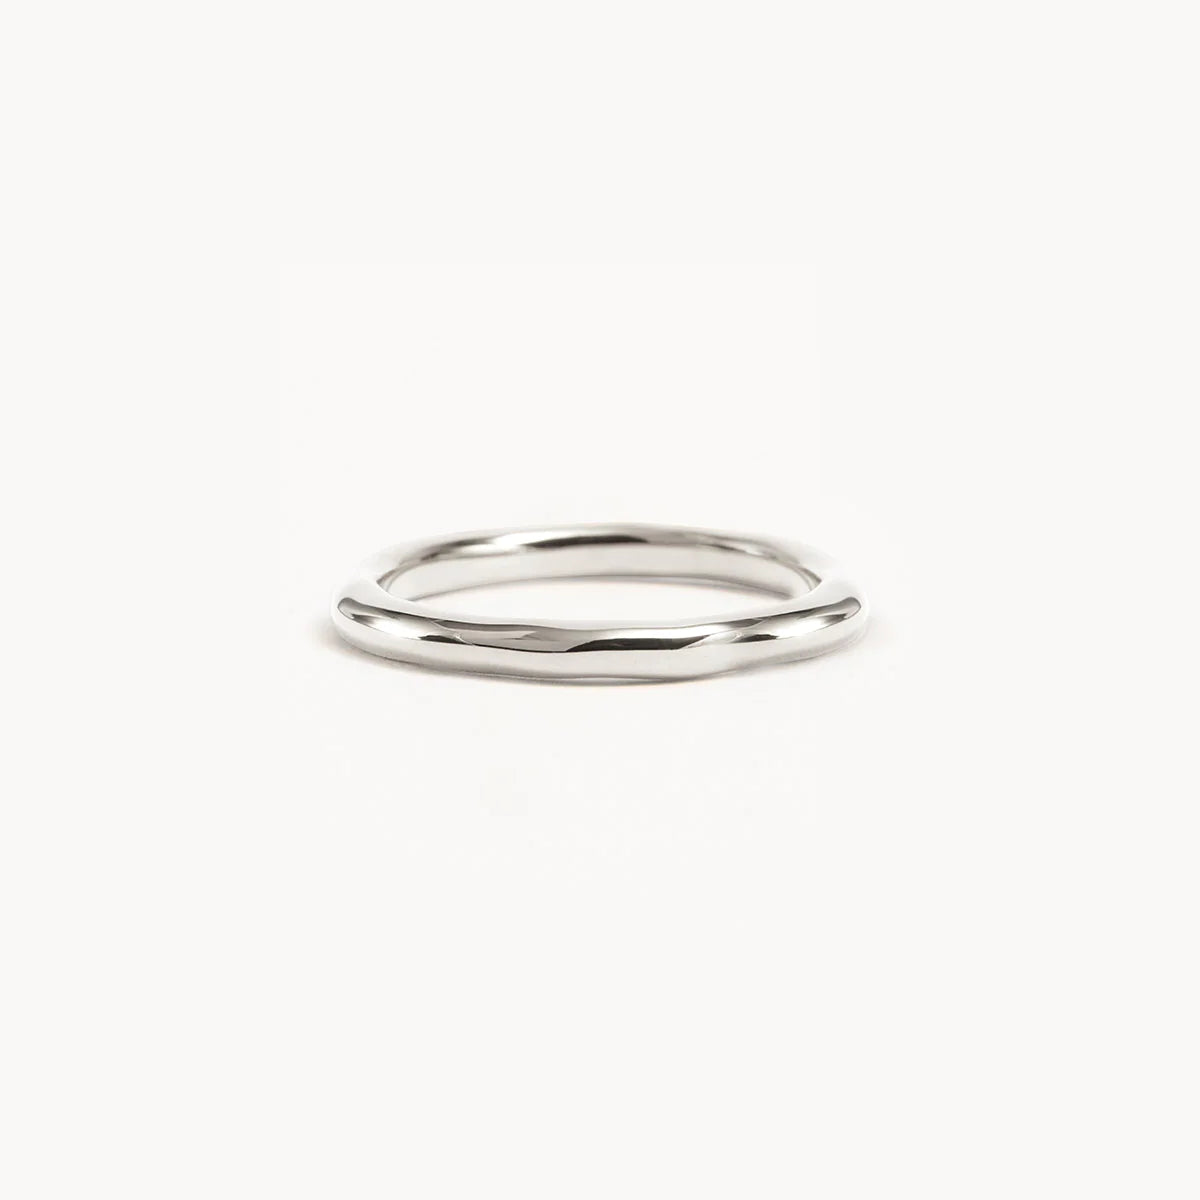 BY CHARLOTTE | LOVER THIN RING - SILVER